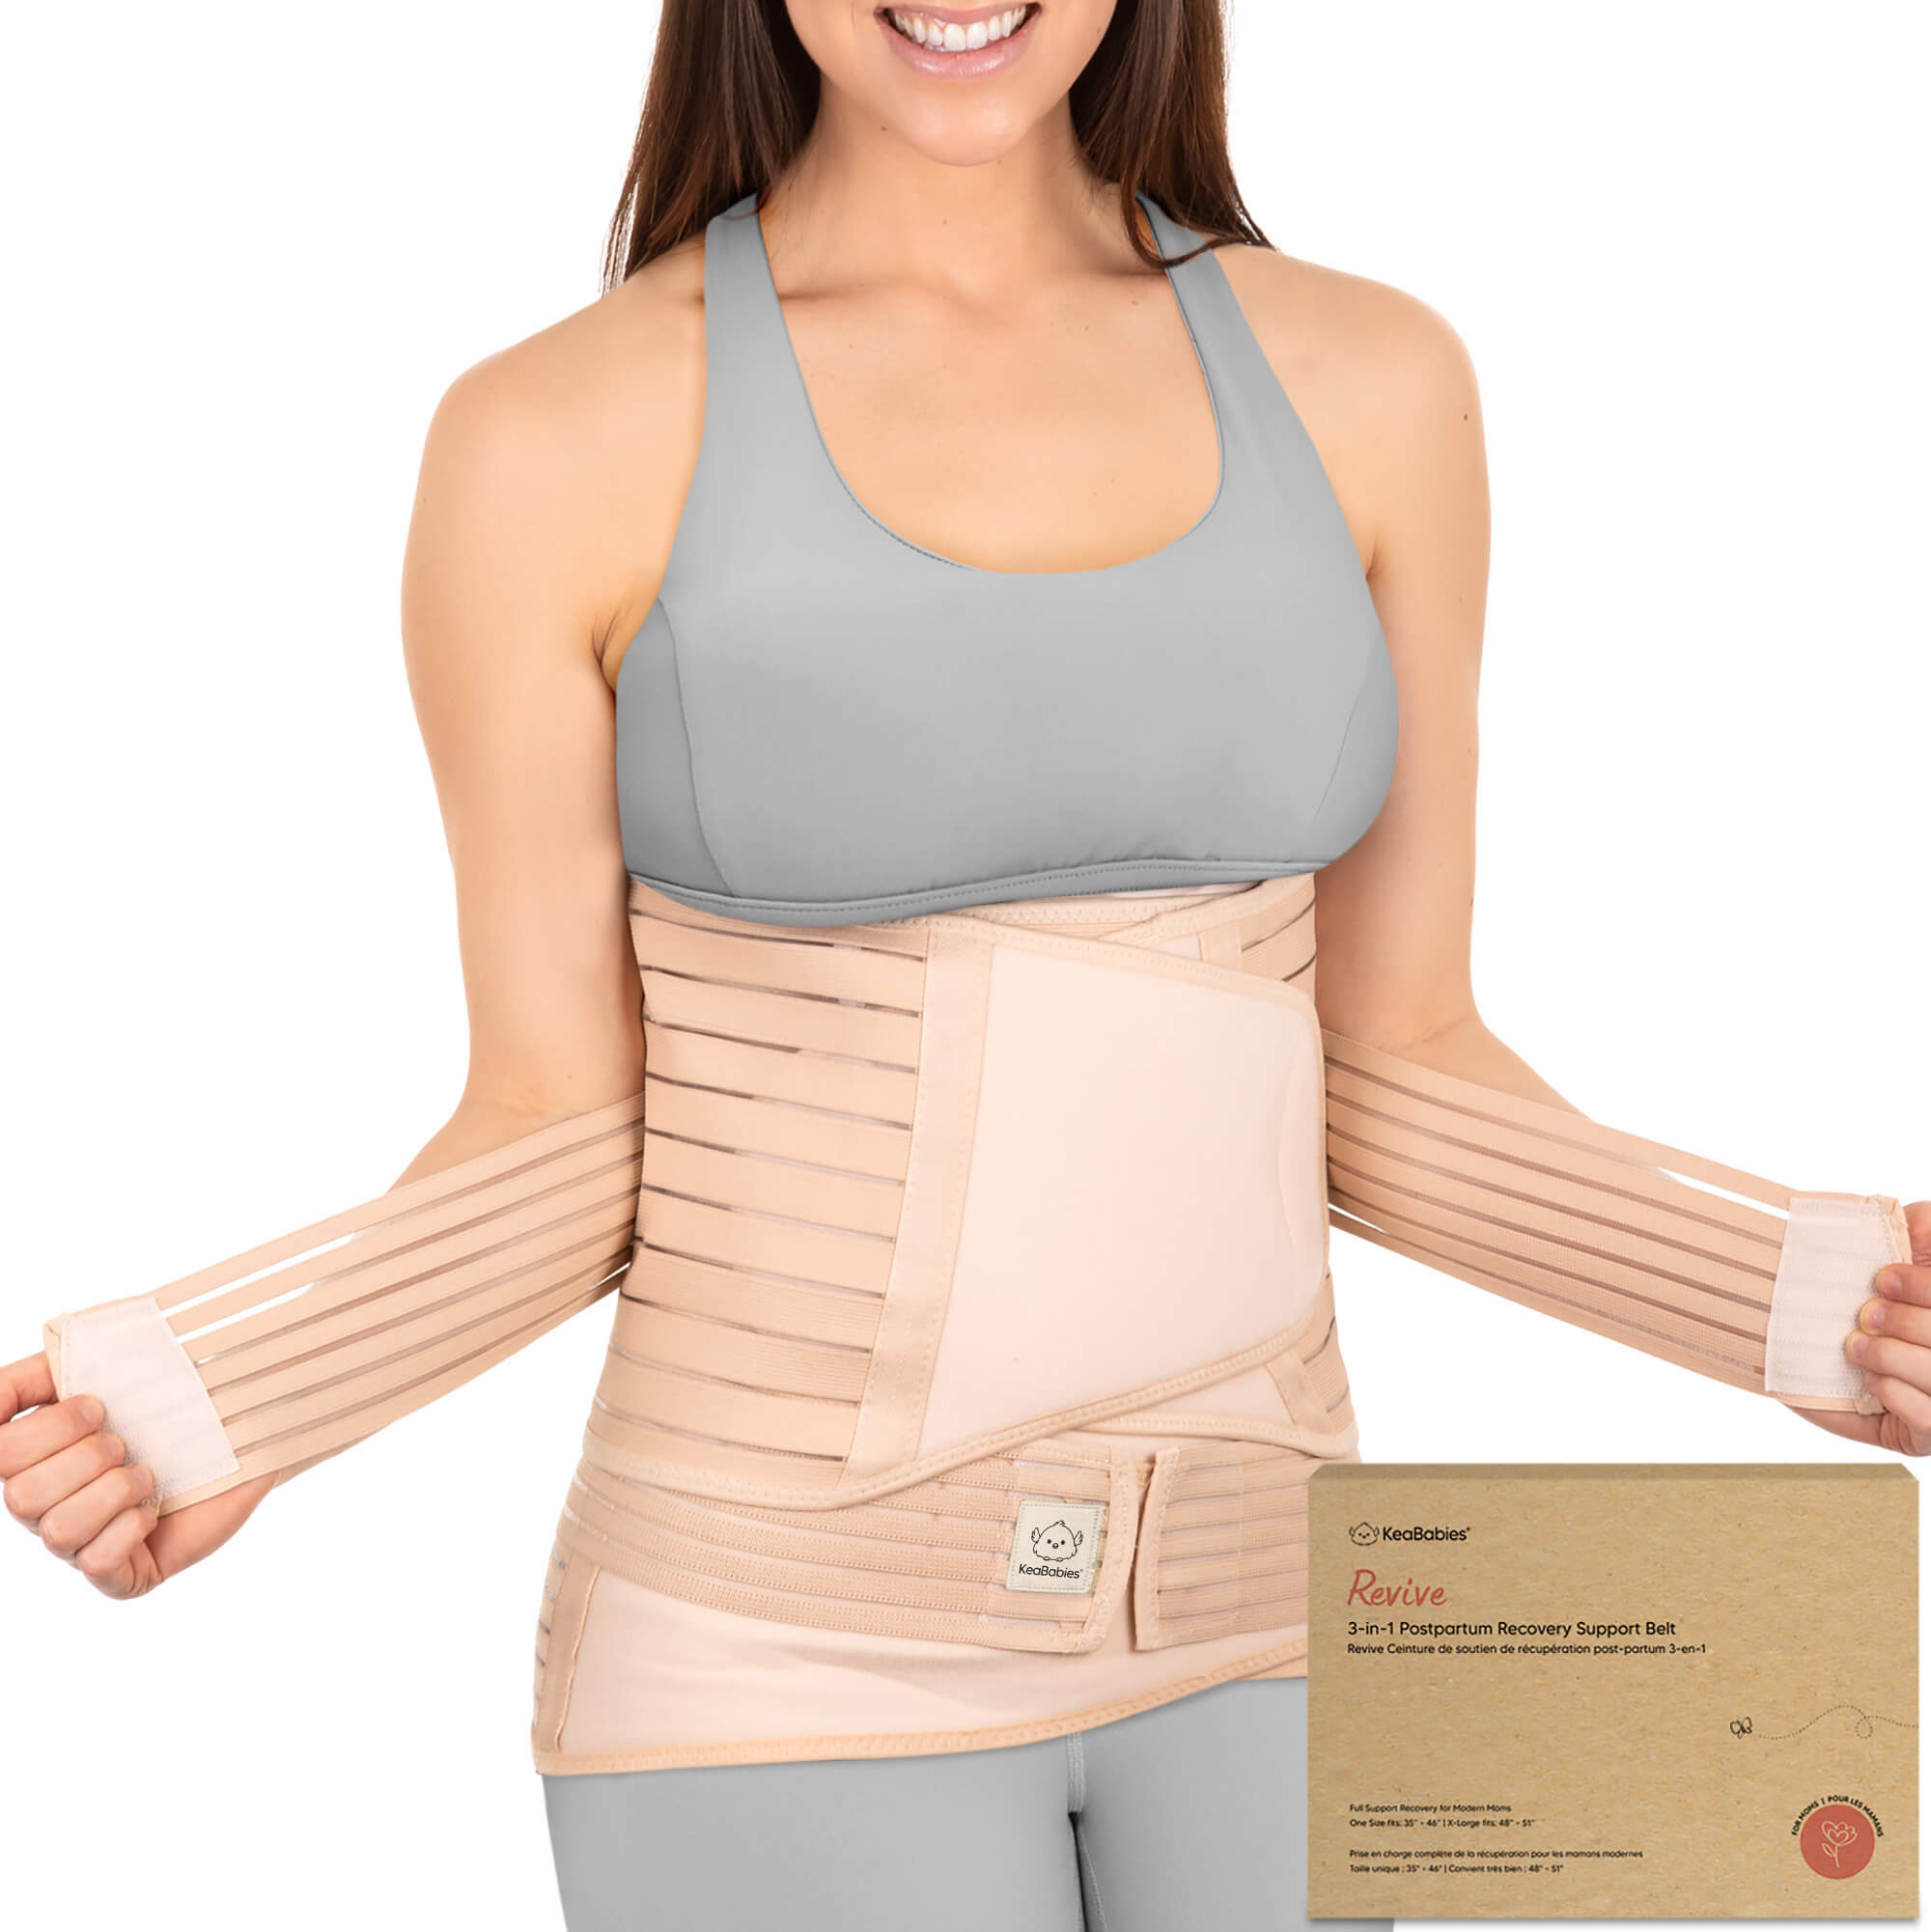 KeaBabies Revive 3-in-1 Postpartum Recovery Support Belt